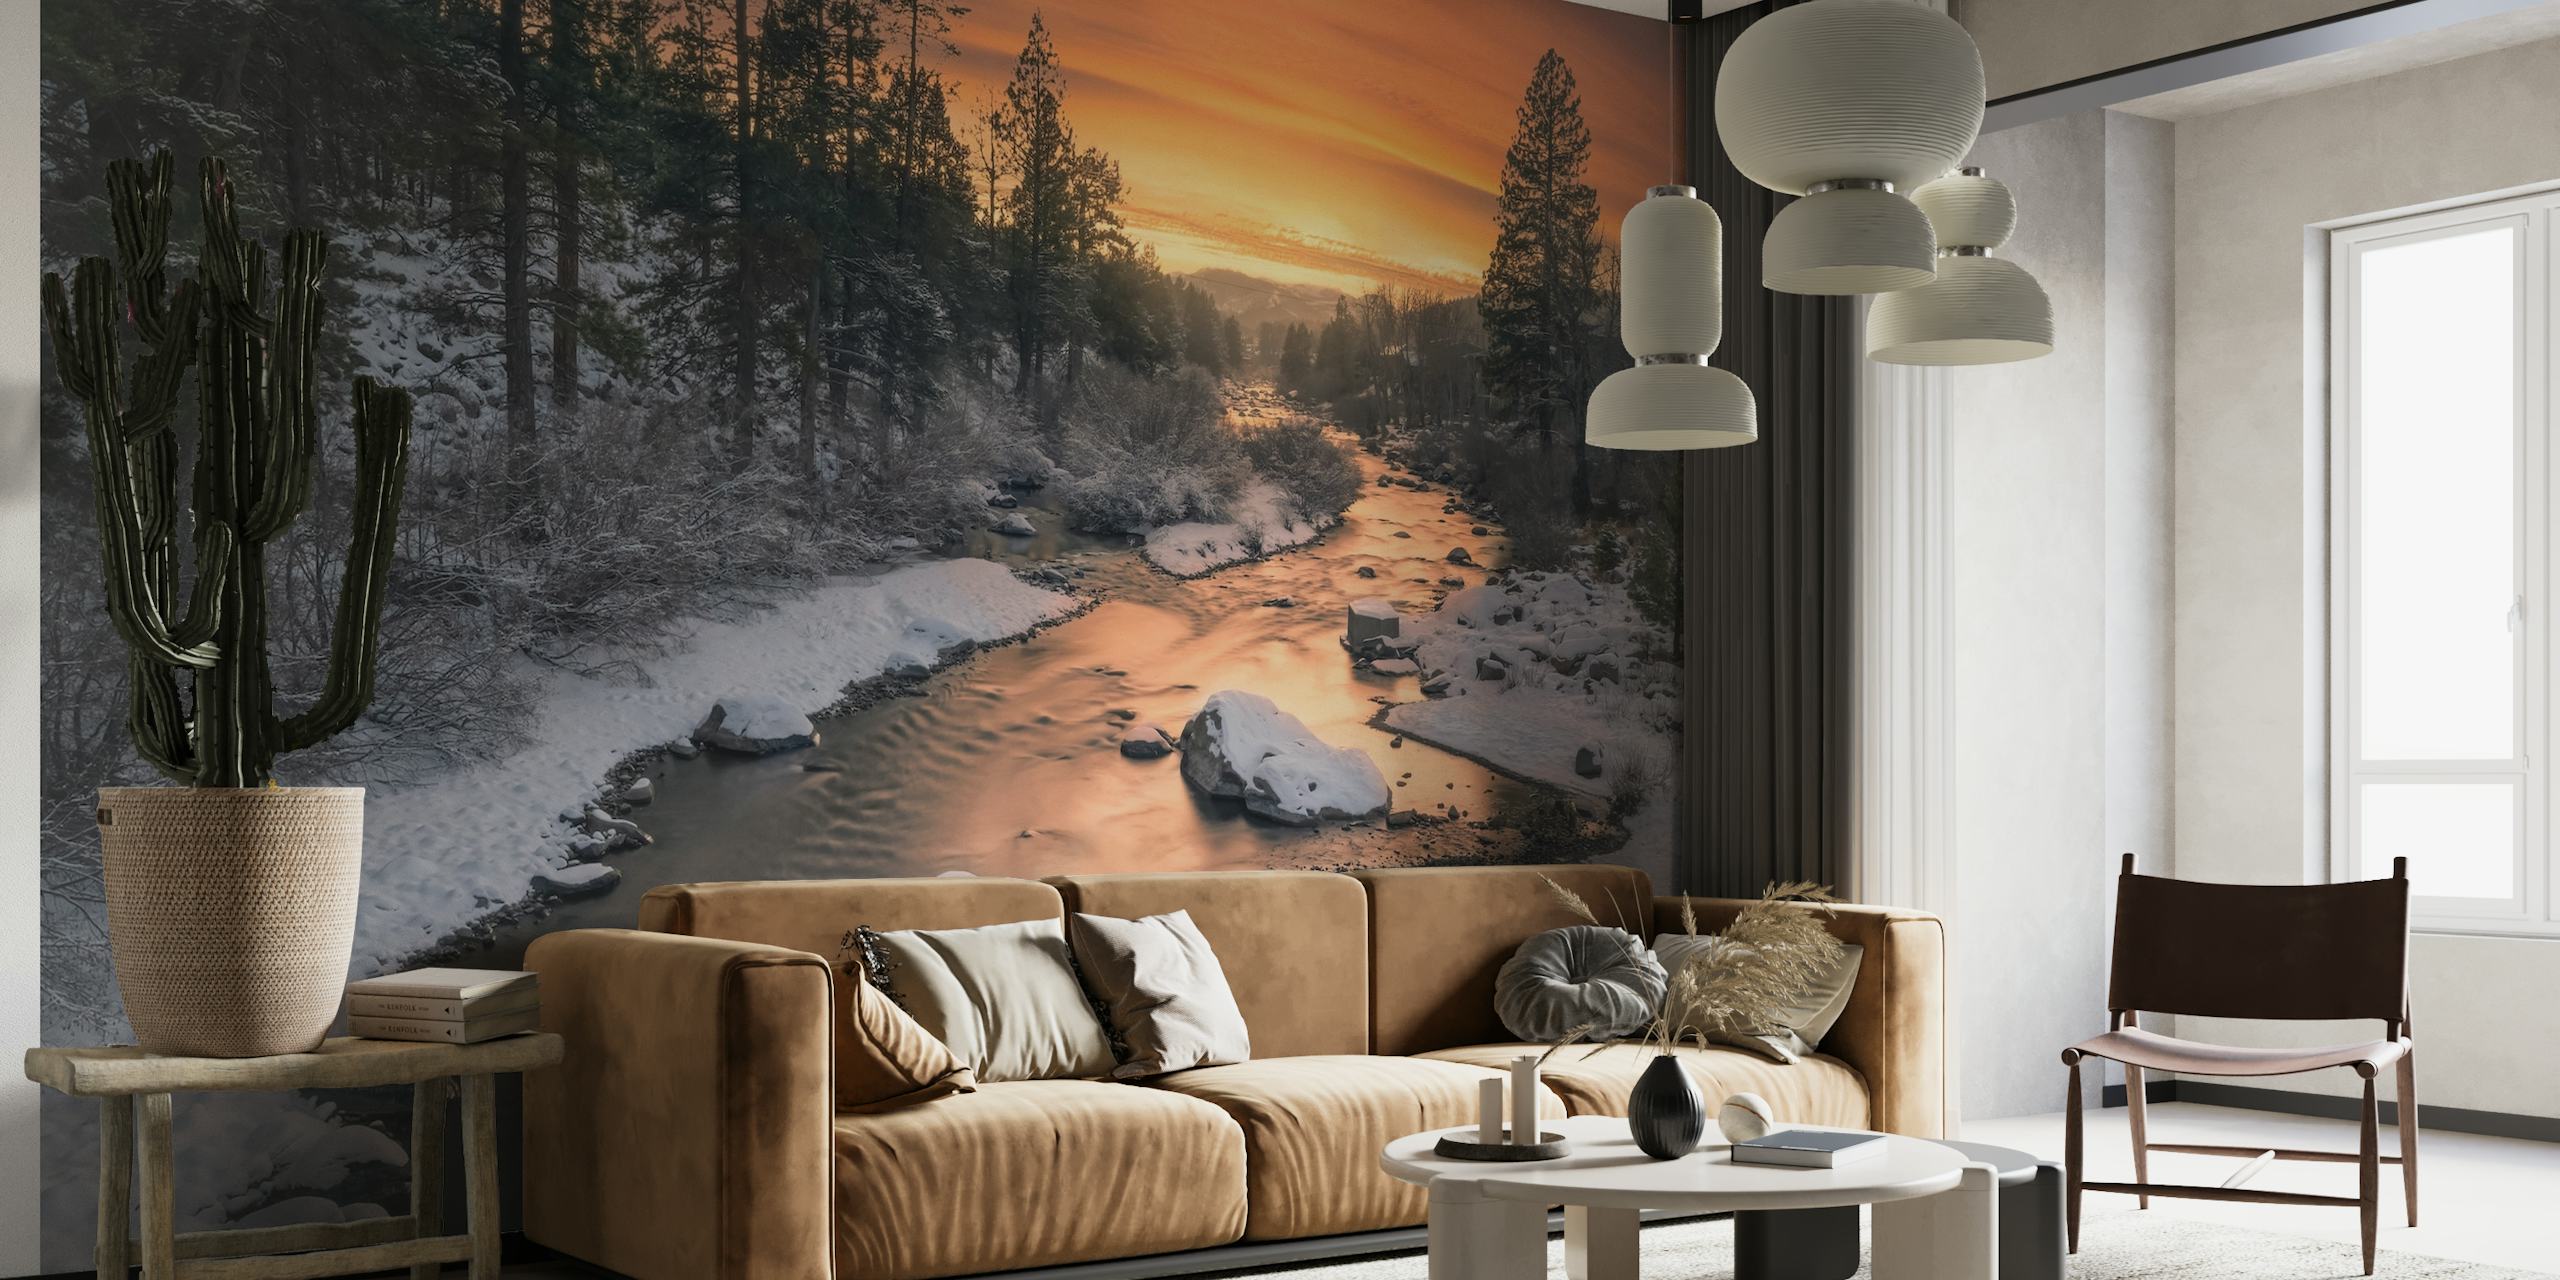 Truckee river wall mural with sunset and snowy landscape